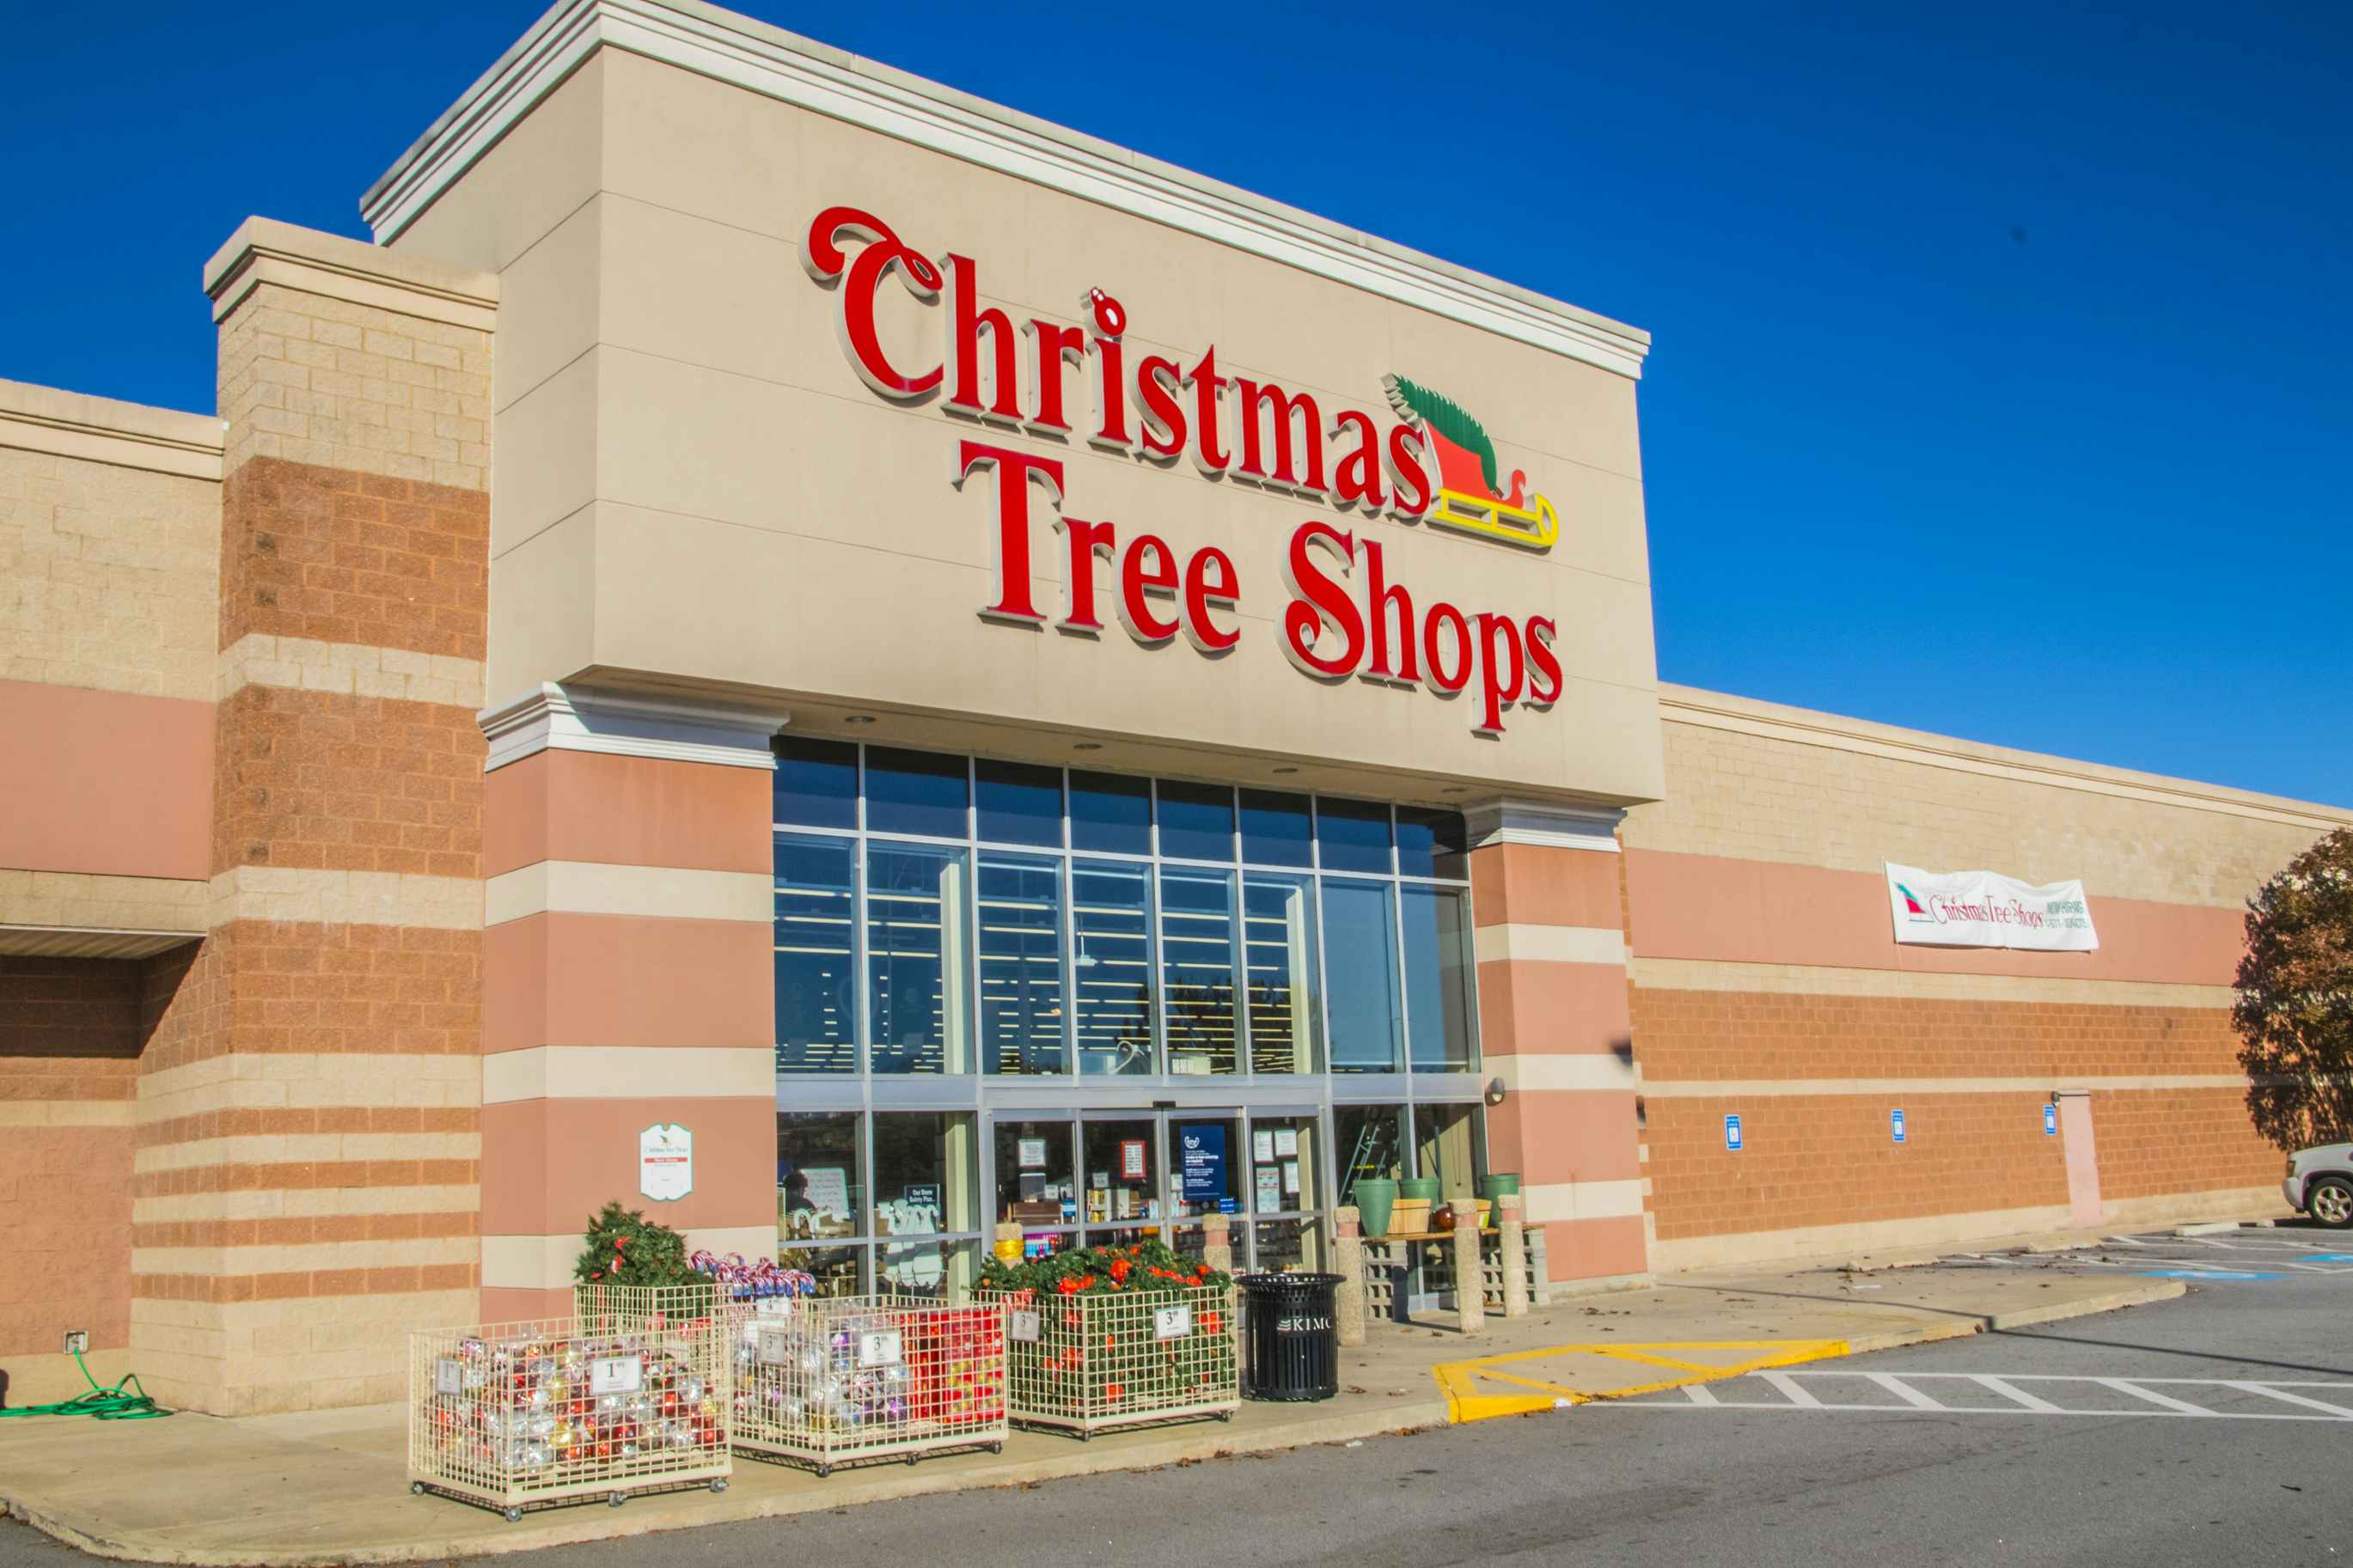 A Christmas Tree Shops store front and entrance